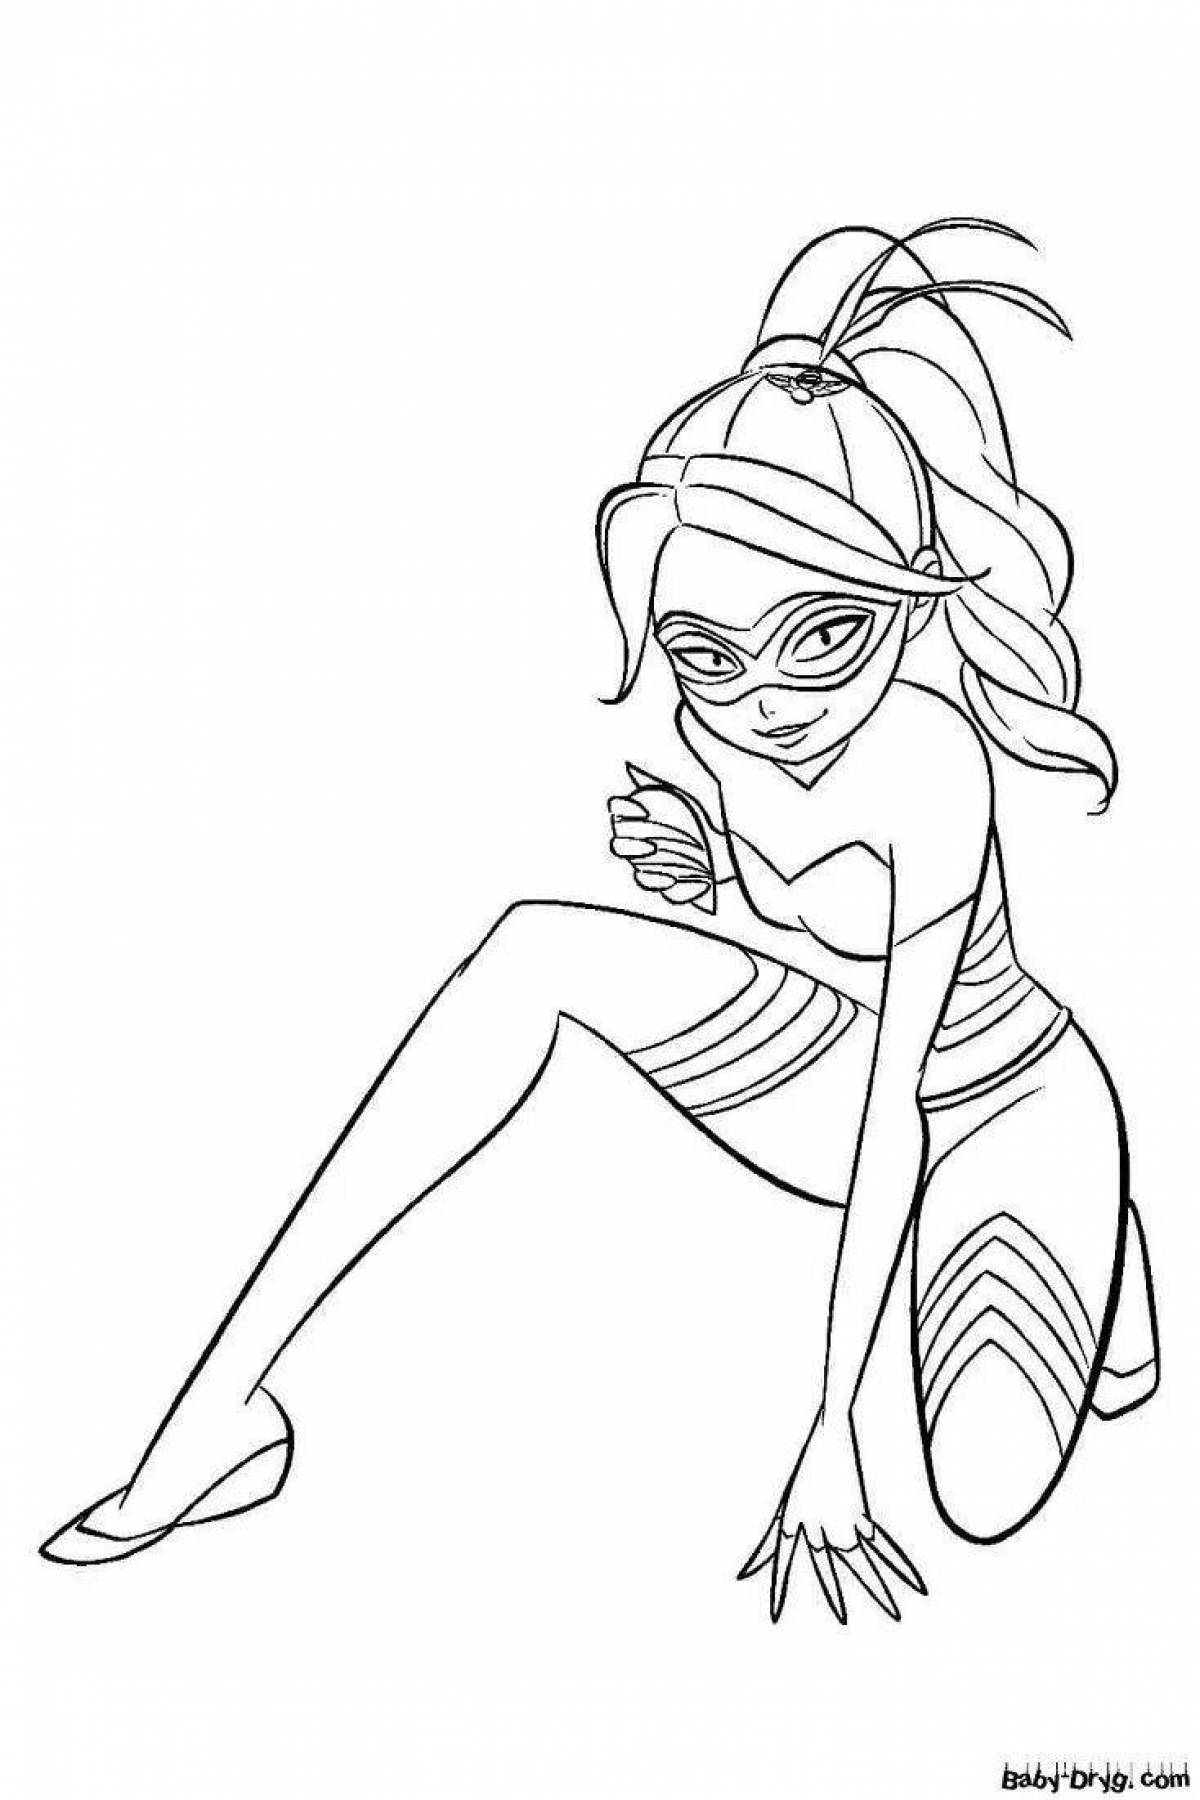 Magic shell coloring page